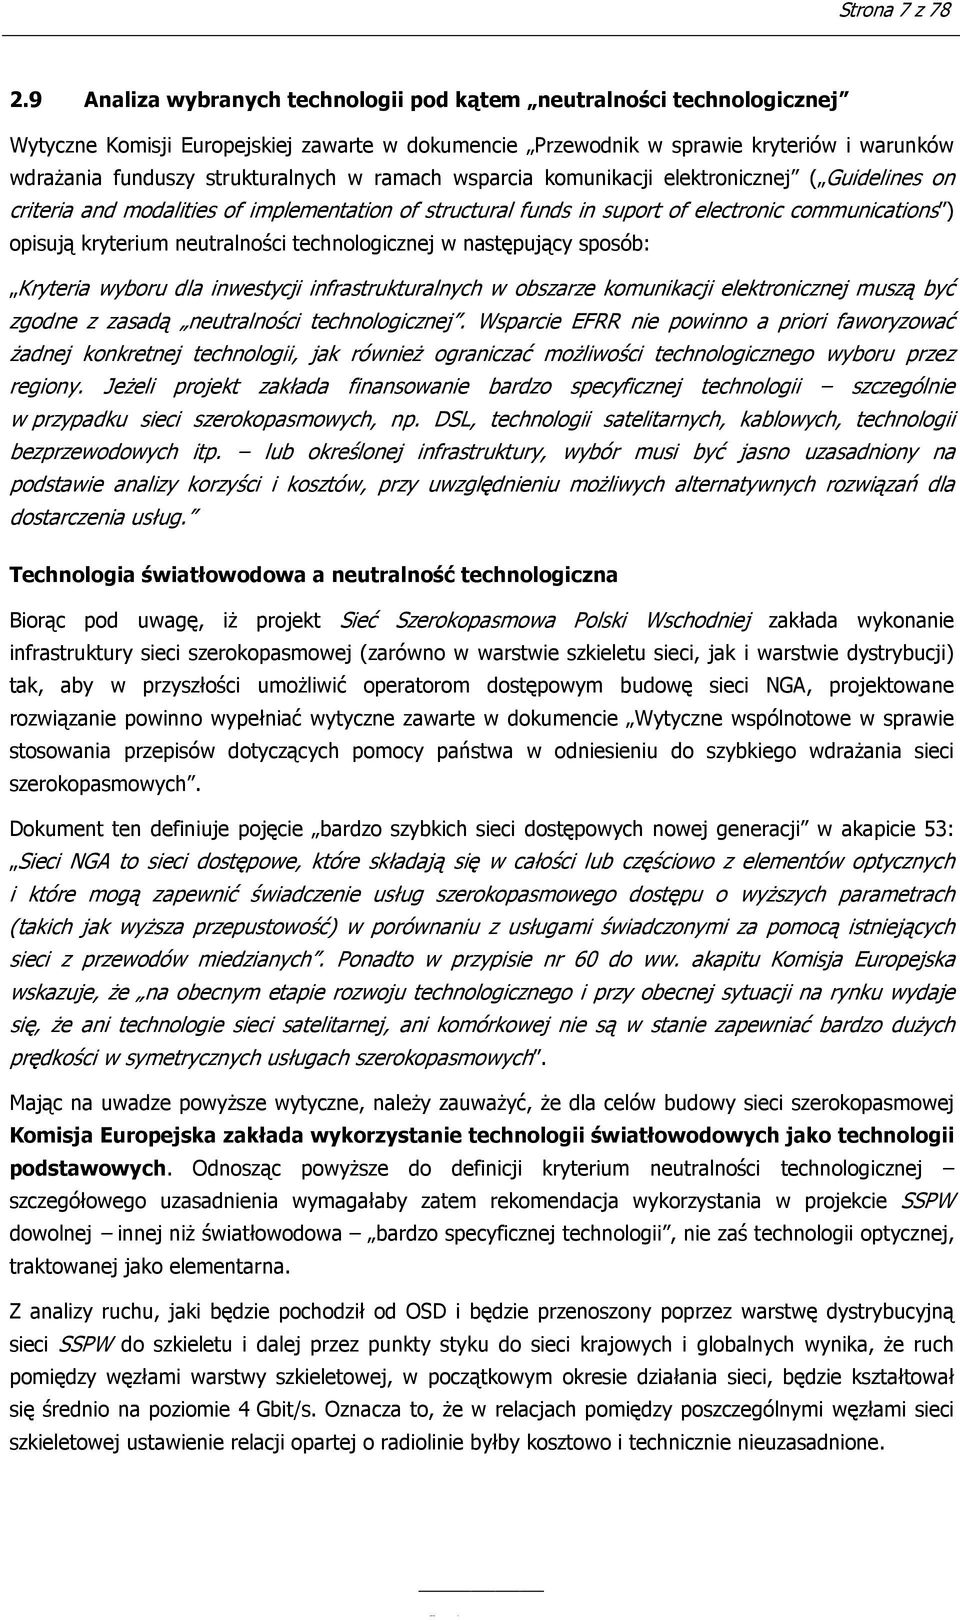 ramach wsparcia komunikacji elektronicznej ( Guidelines on criteria and modalities of implementation of structural funds in suport of electronic communications ) opisują kryterium neutralności